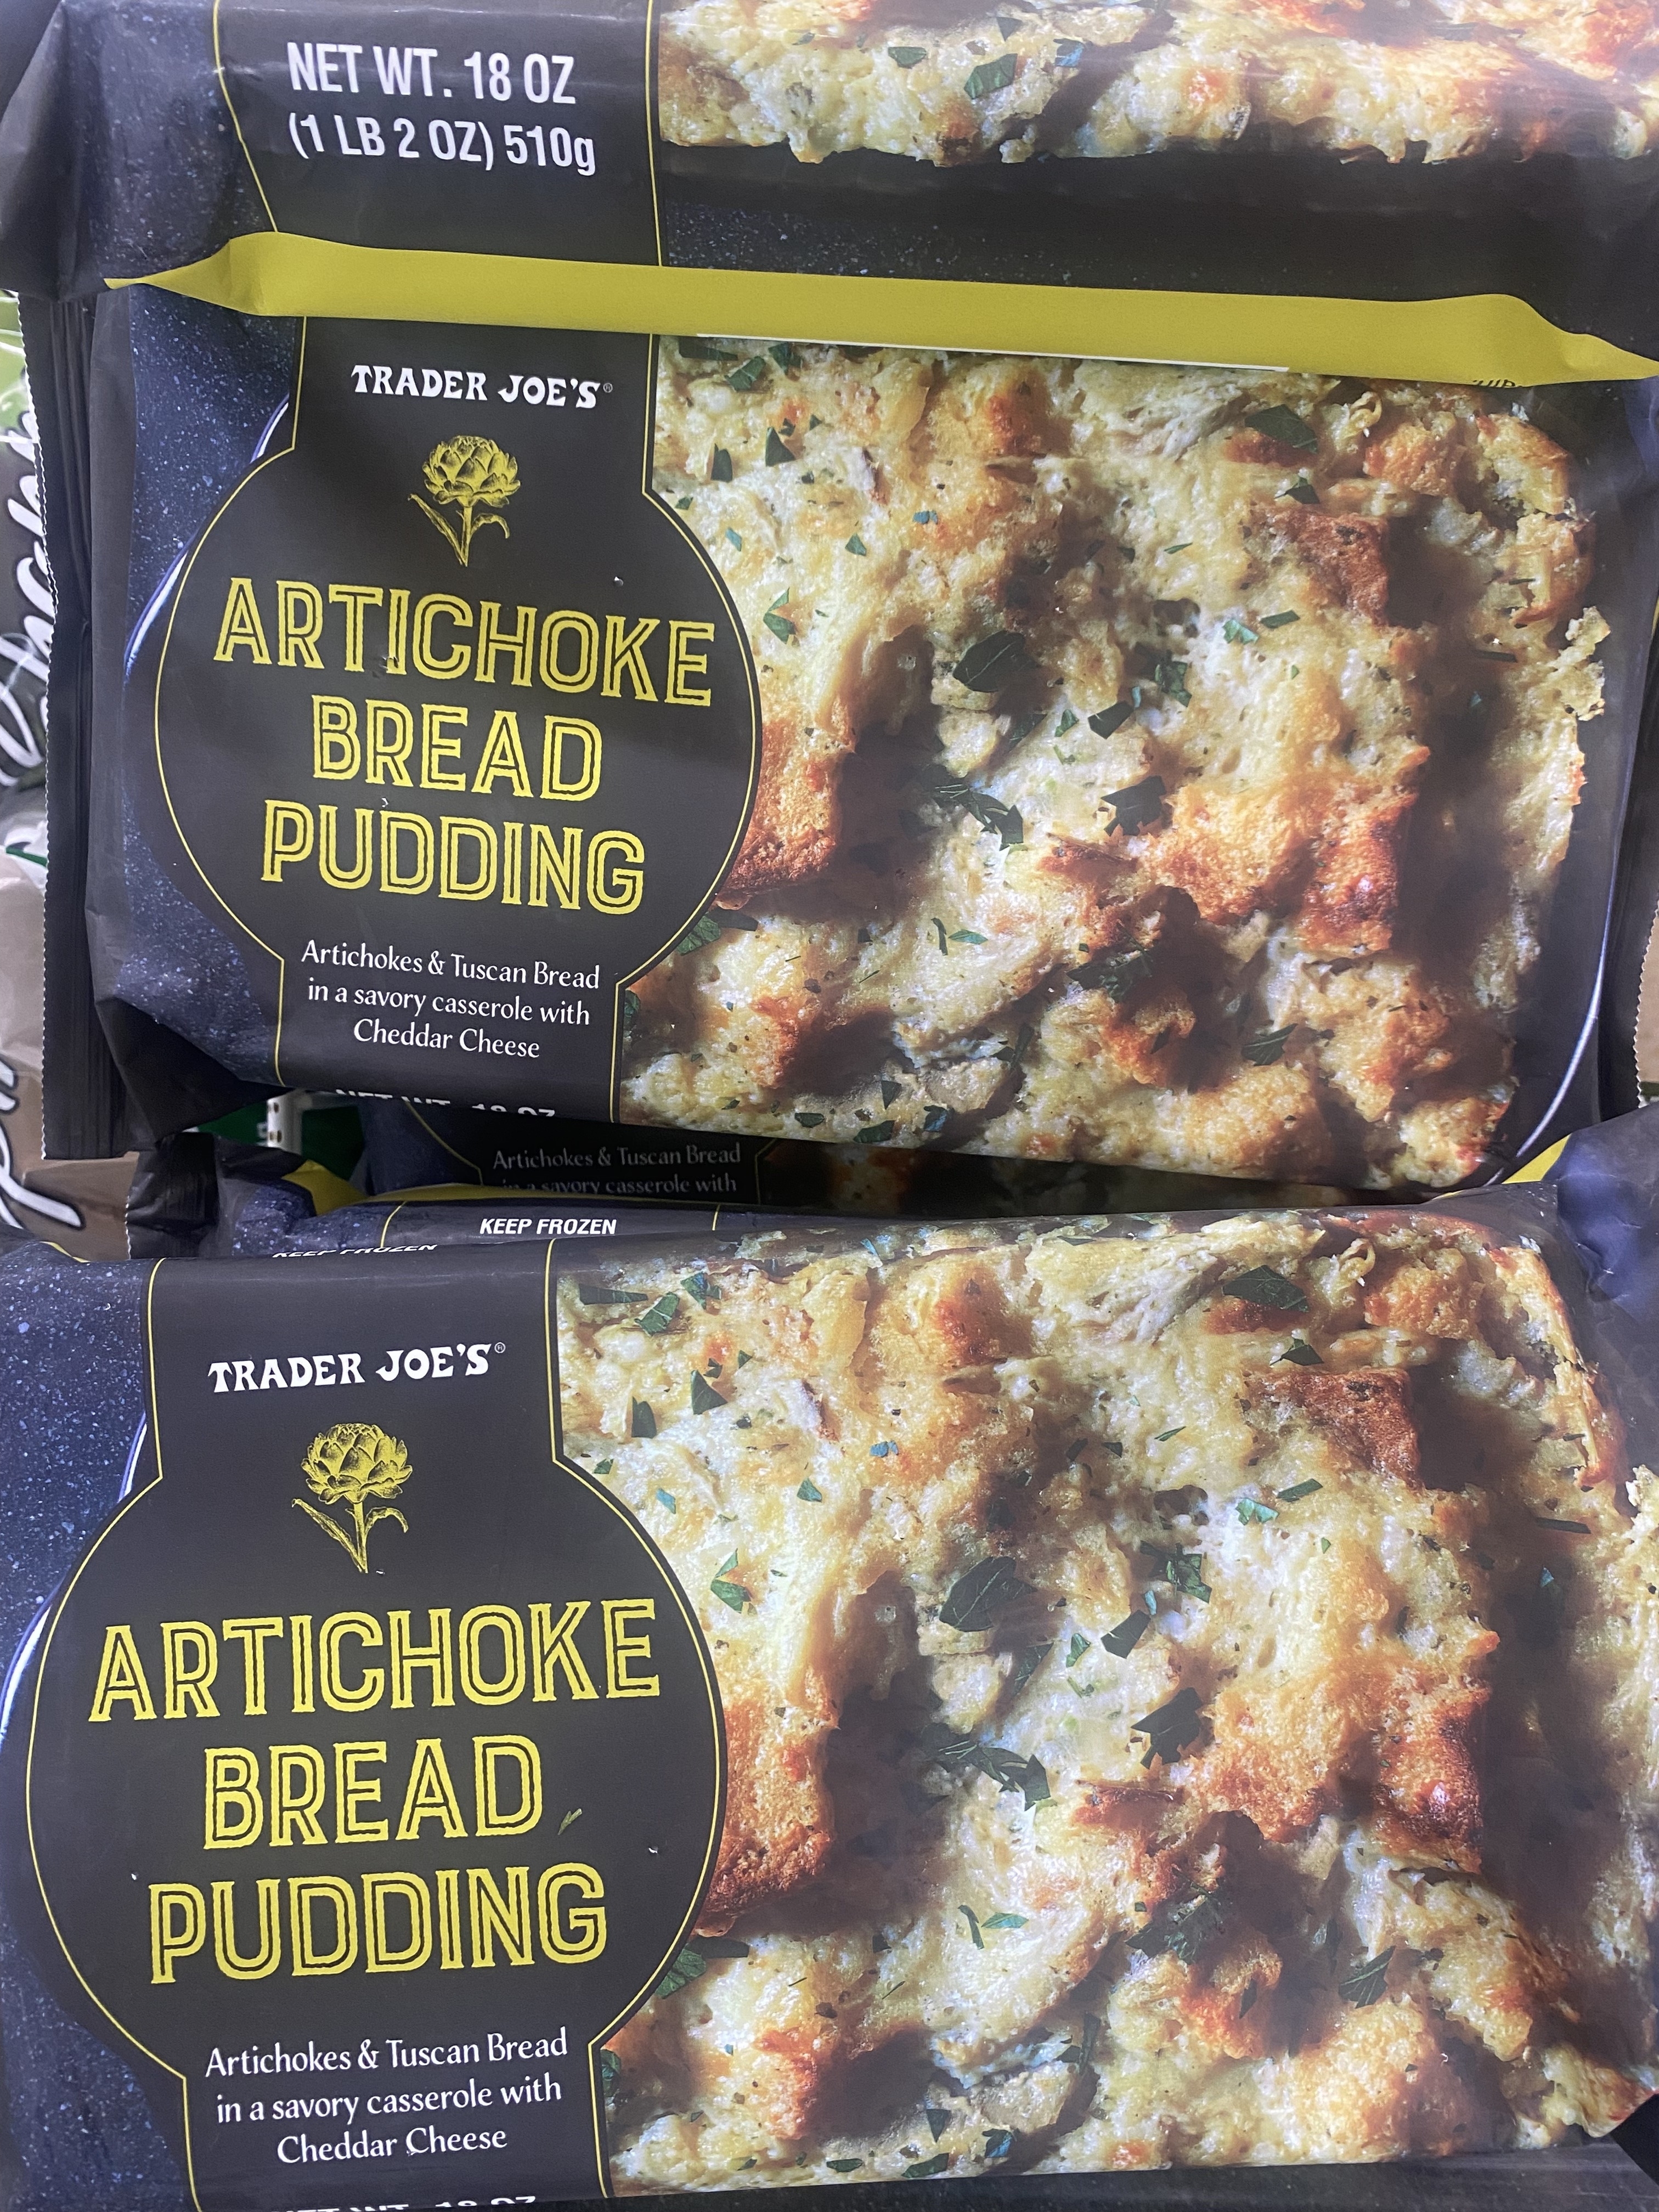 a package of artichoke bread pudding